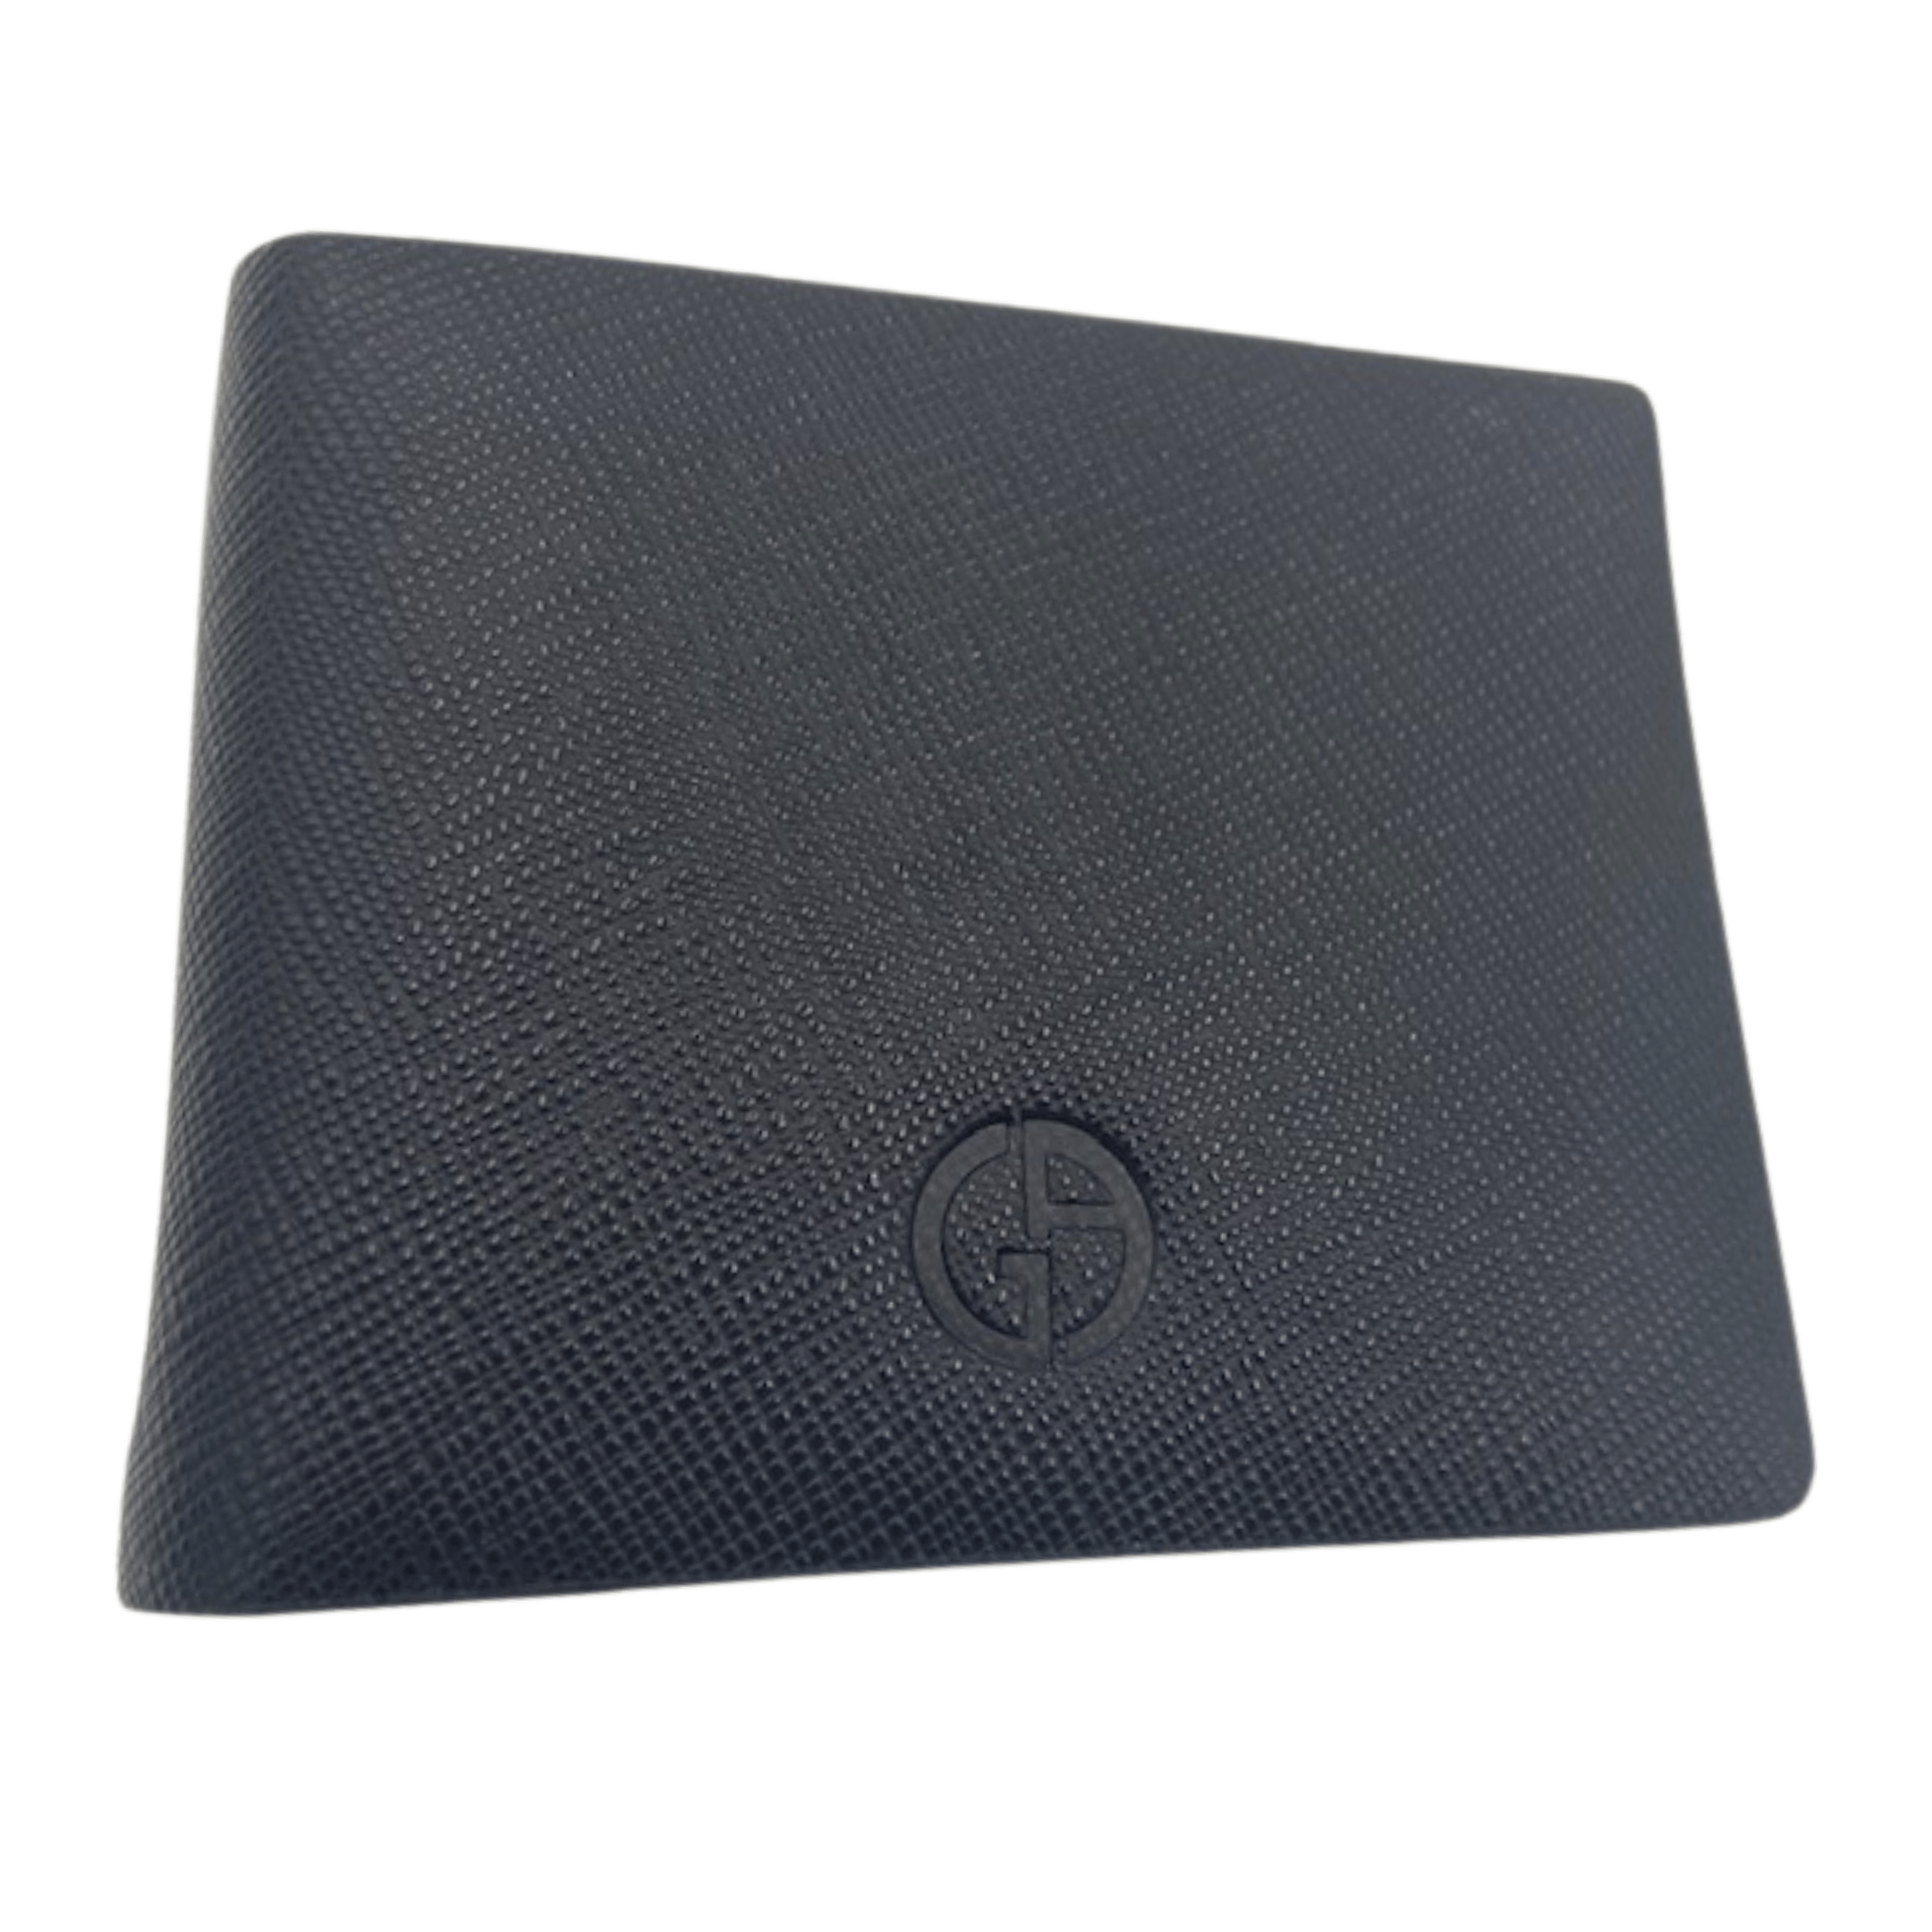 Amazon.com: EMPORIO ARMANI(エンポリオアルマーニ) Men's Wallet, 80001, One Size :  Clothing, Shoes & Jewelry